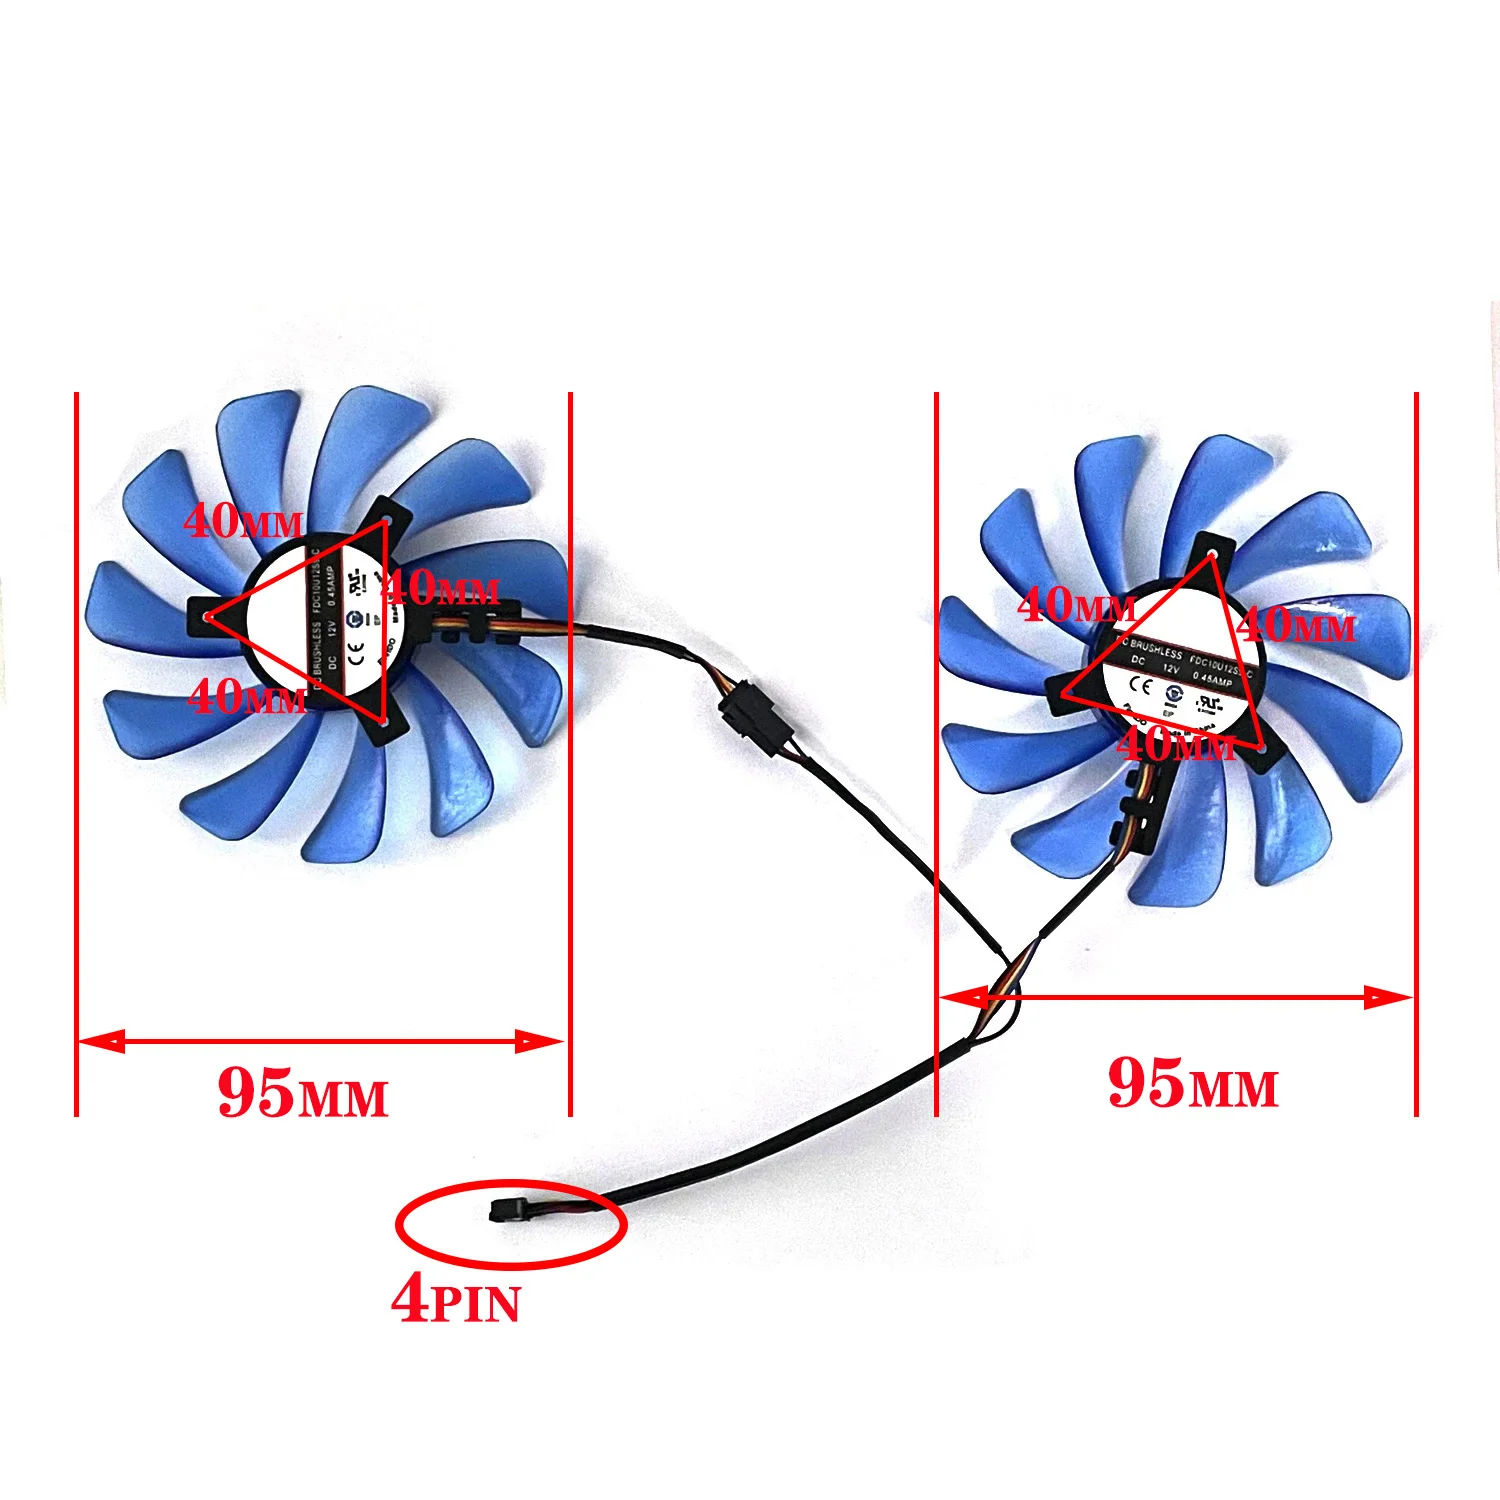 2PCS 95mm 4pin DC 12V 0.45A FDC10U12S9-C CF1010U12S RX580 Gpu Cooler For HIS RX 580 RX570/470/480 Graphics Card Fan